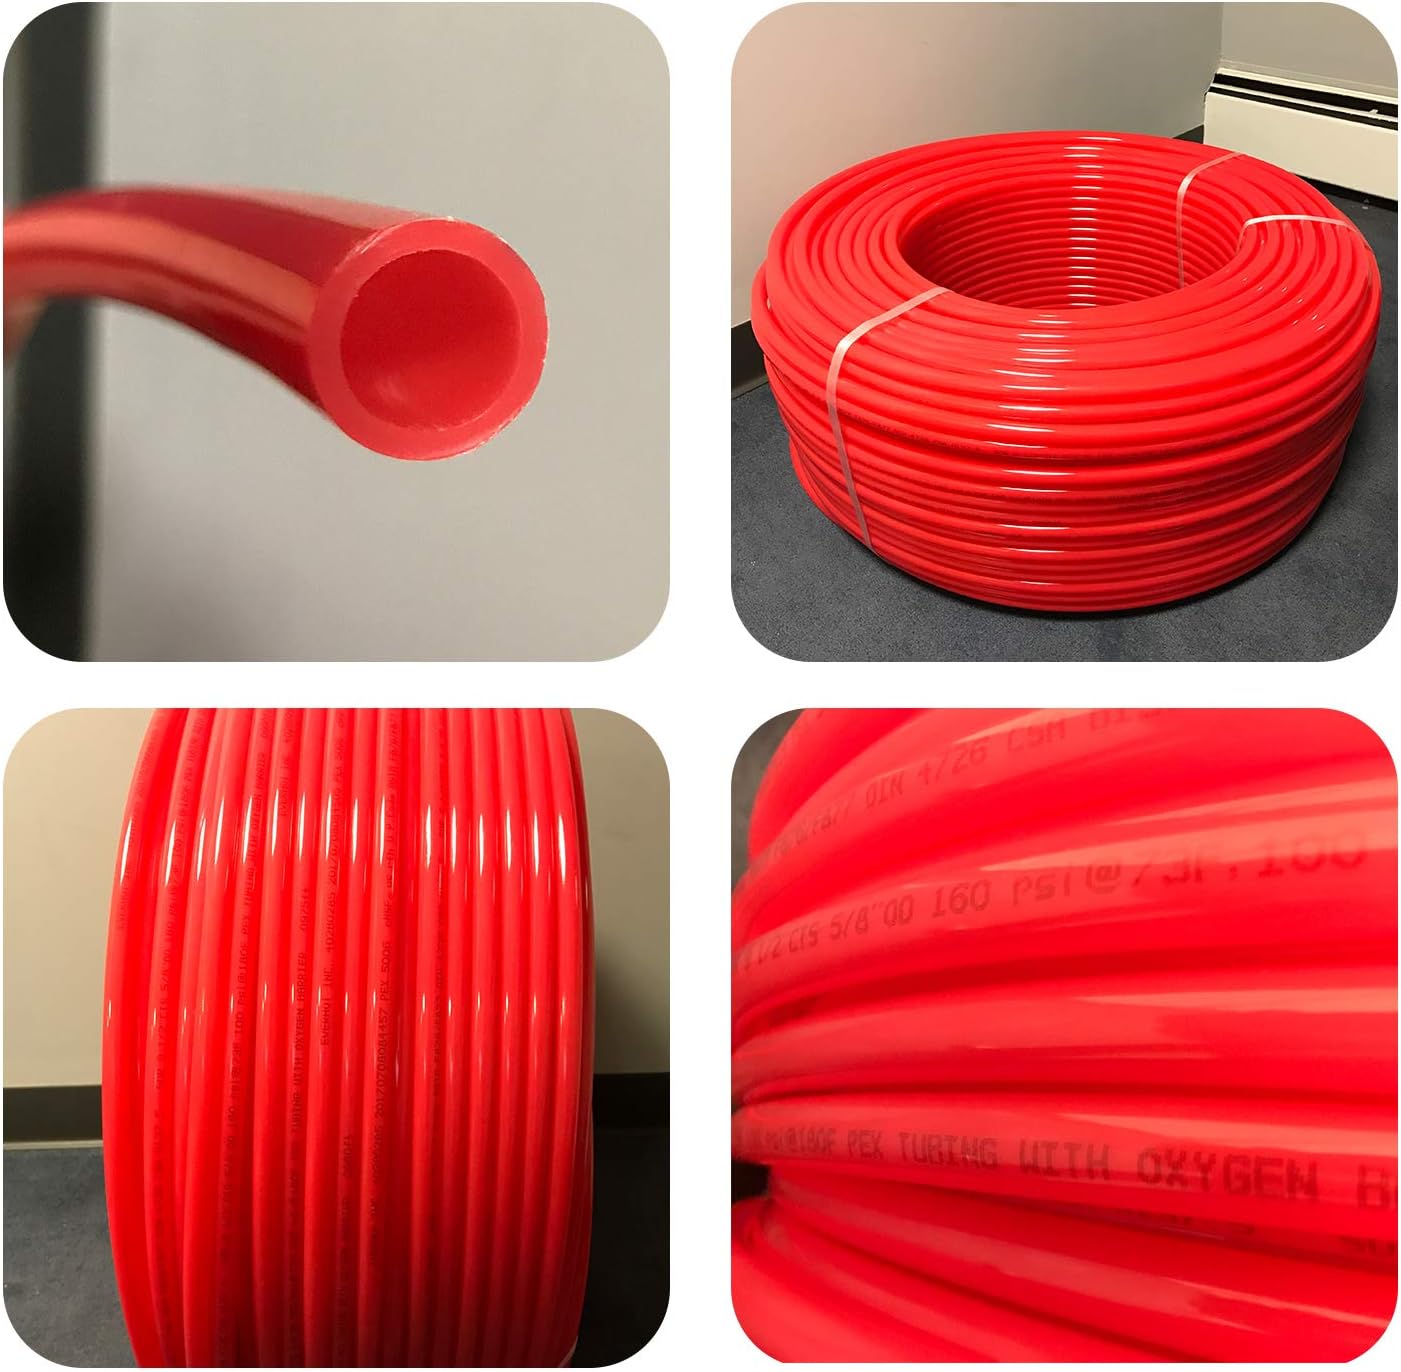 1/2" x 500' Pex-A Potable Water - 500' Coil - Red